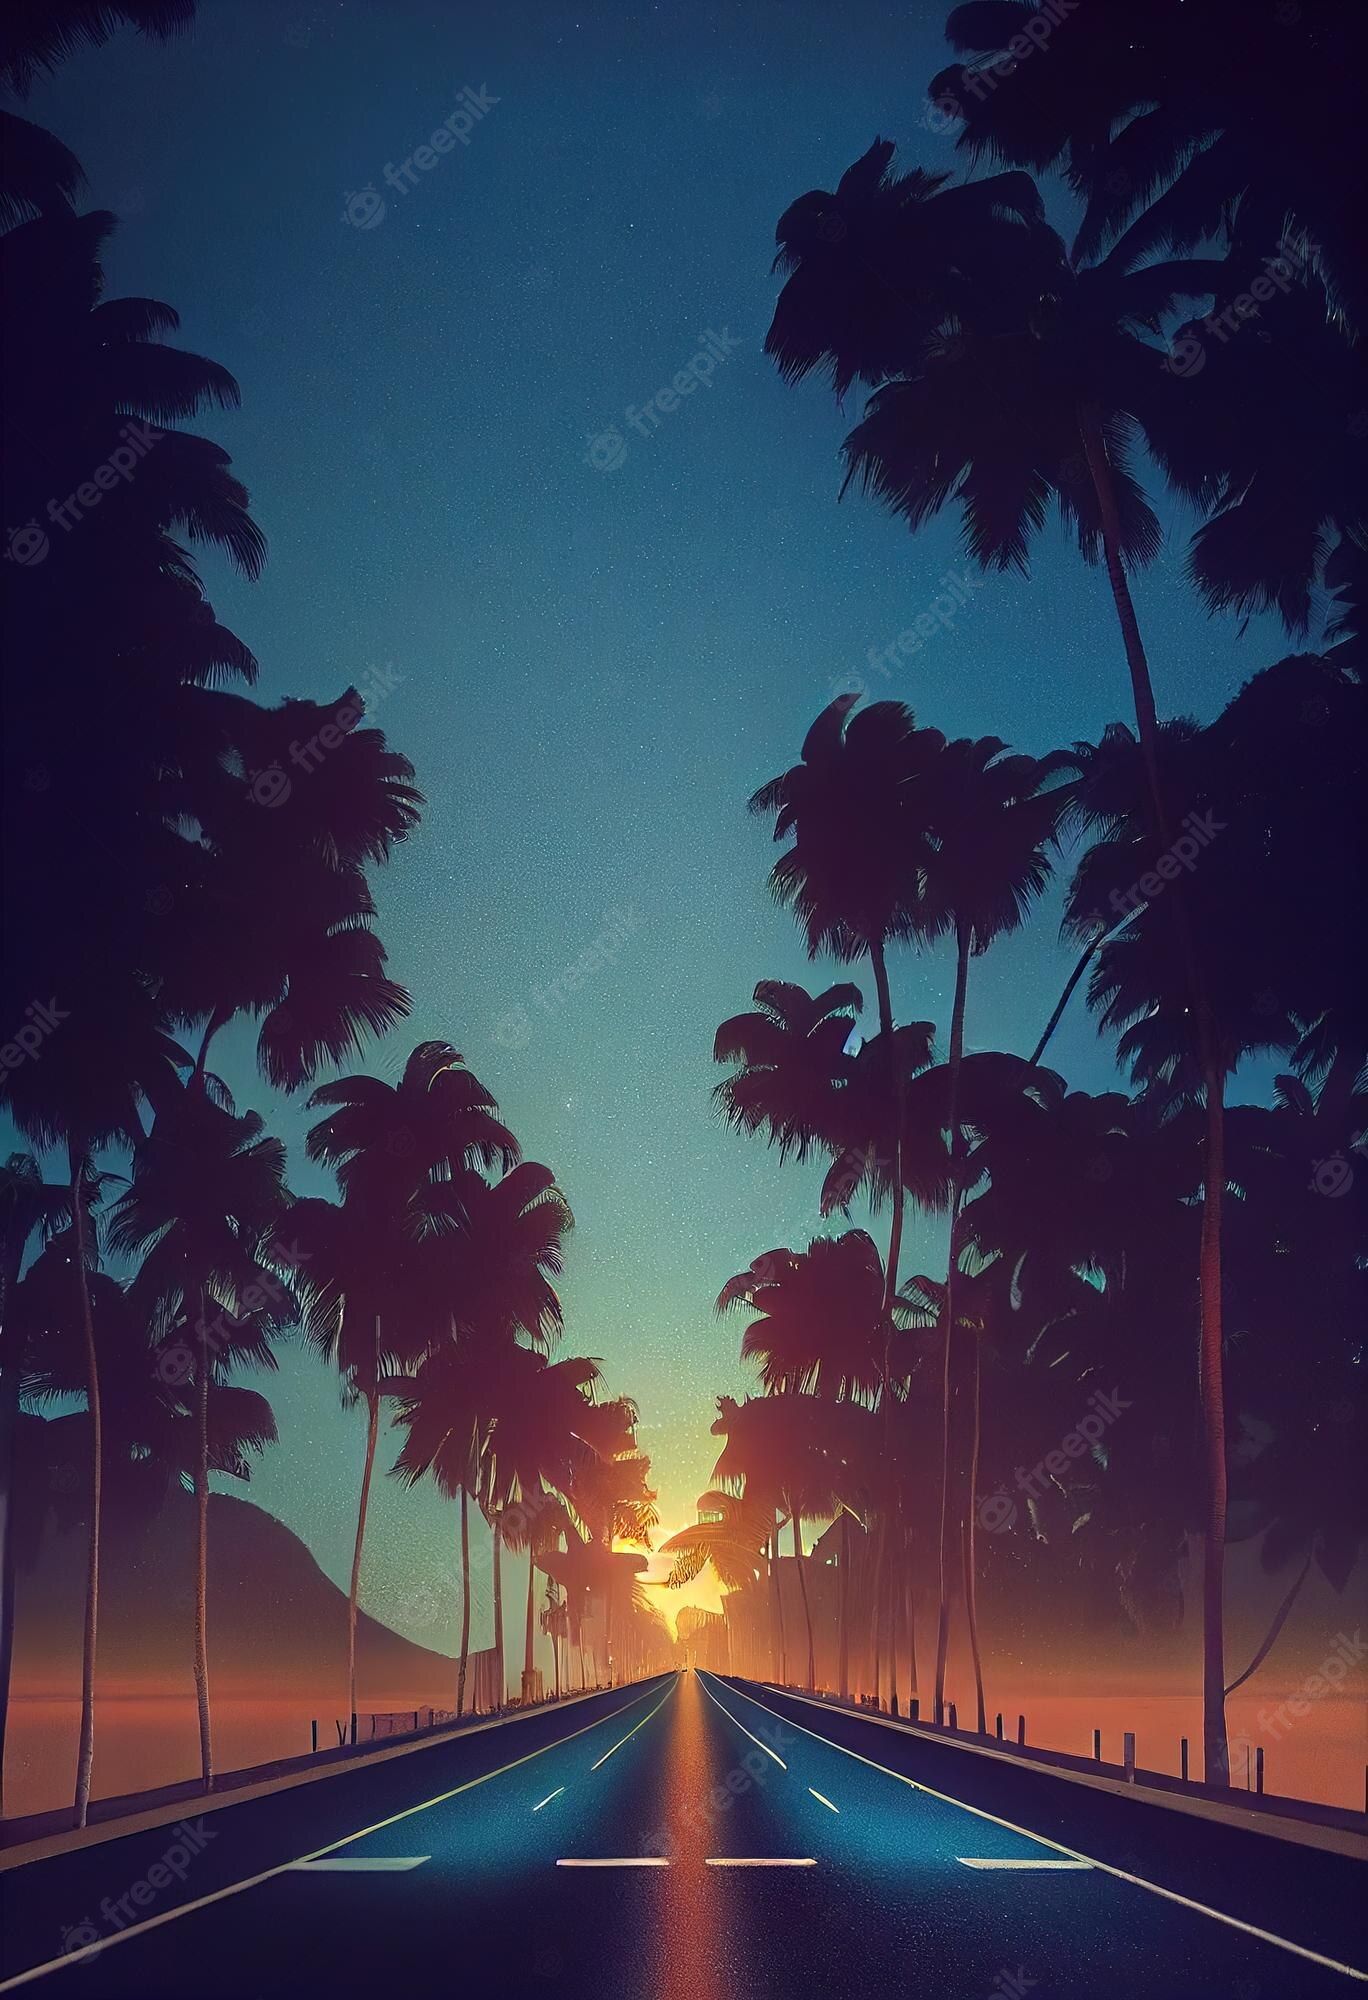 A digital painting of a highway road with palm trees on both sides - Road